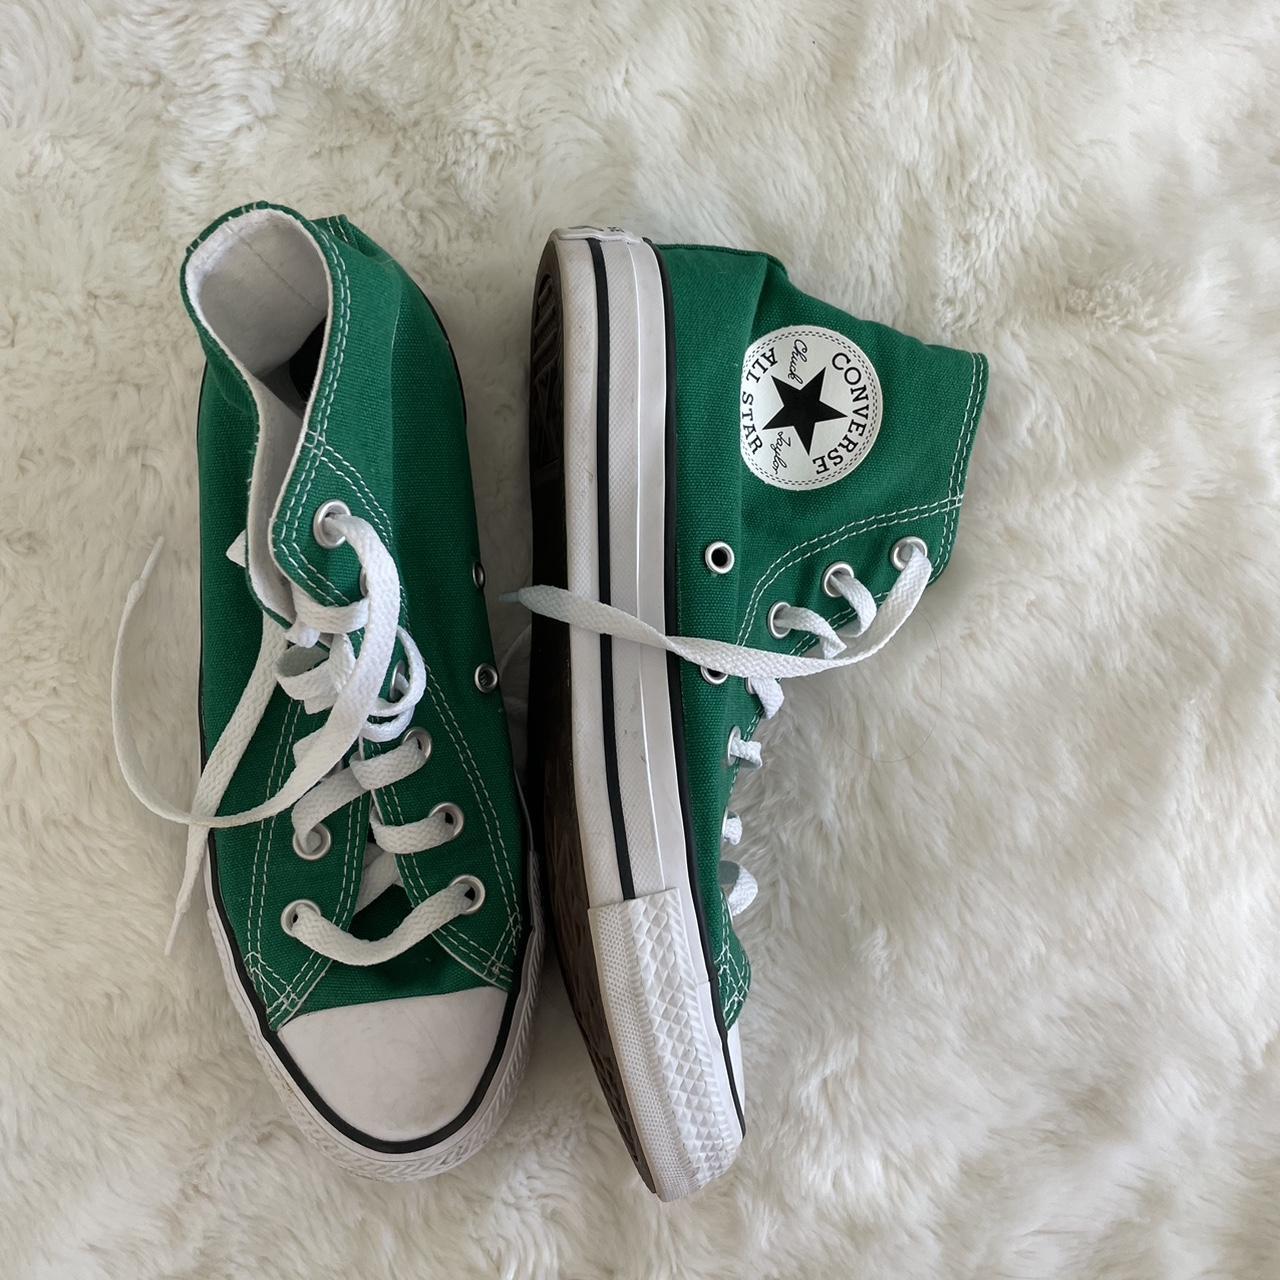 Converse Women's Green and White Trainers | Depop